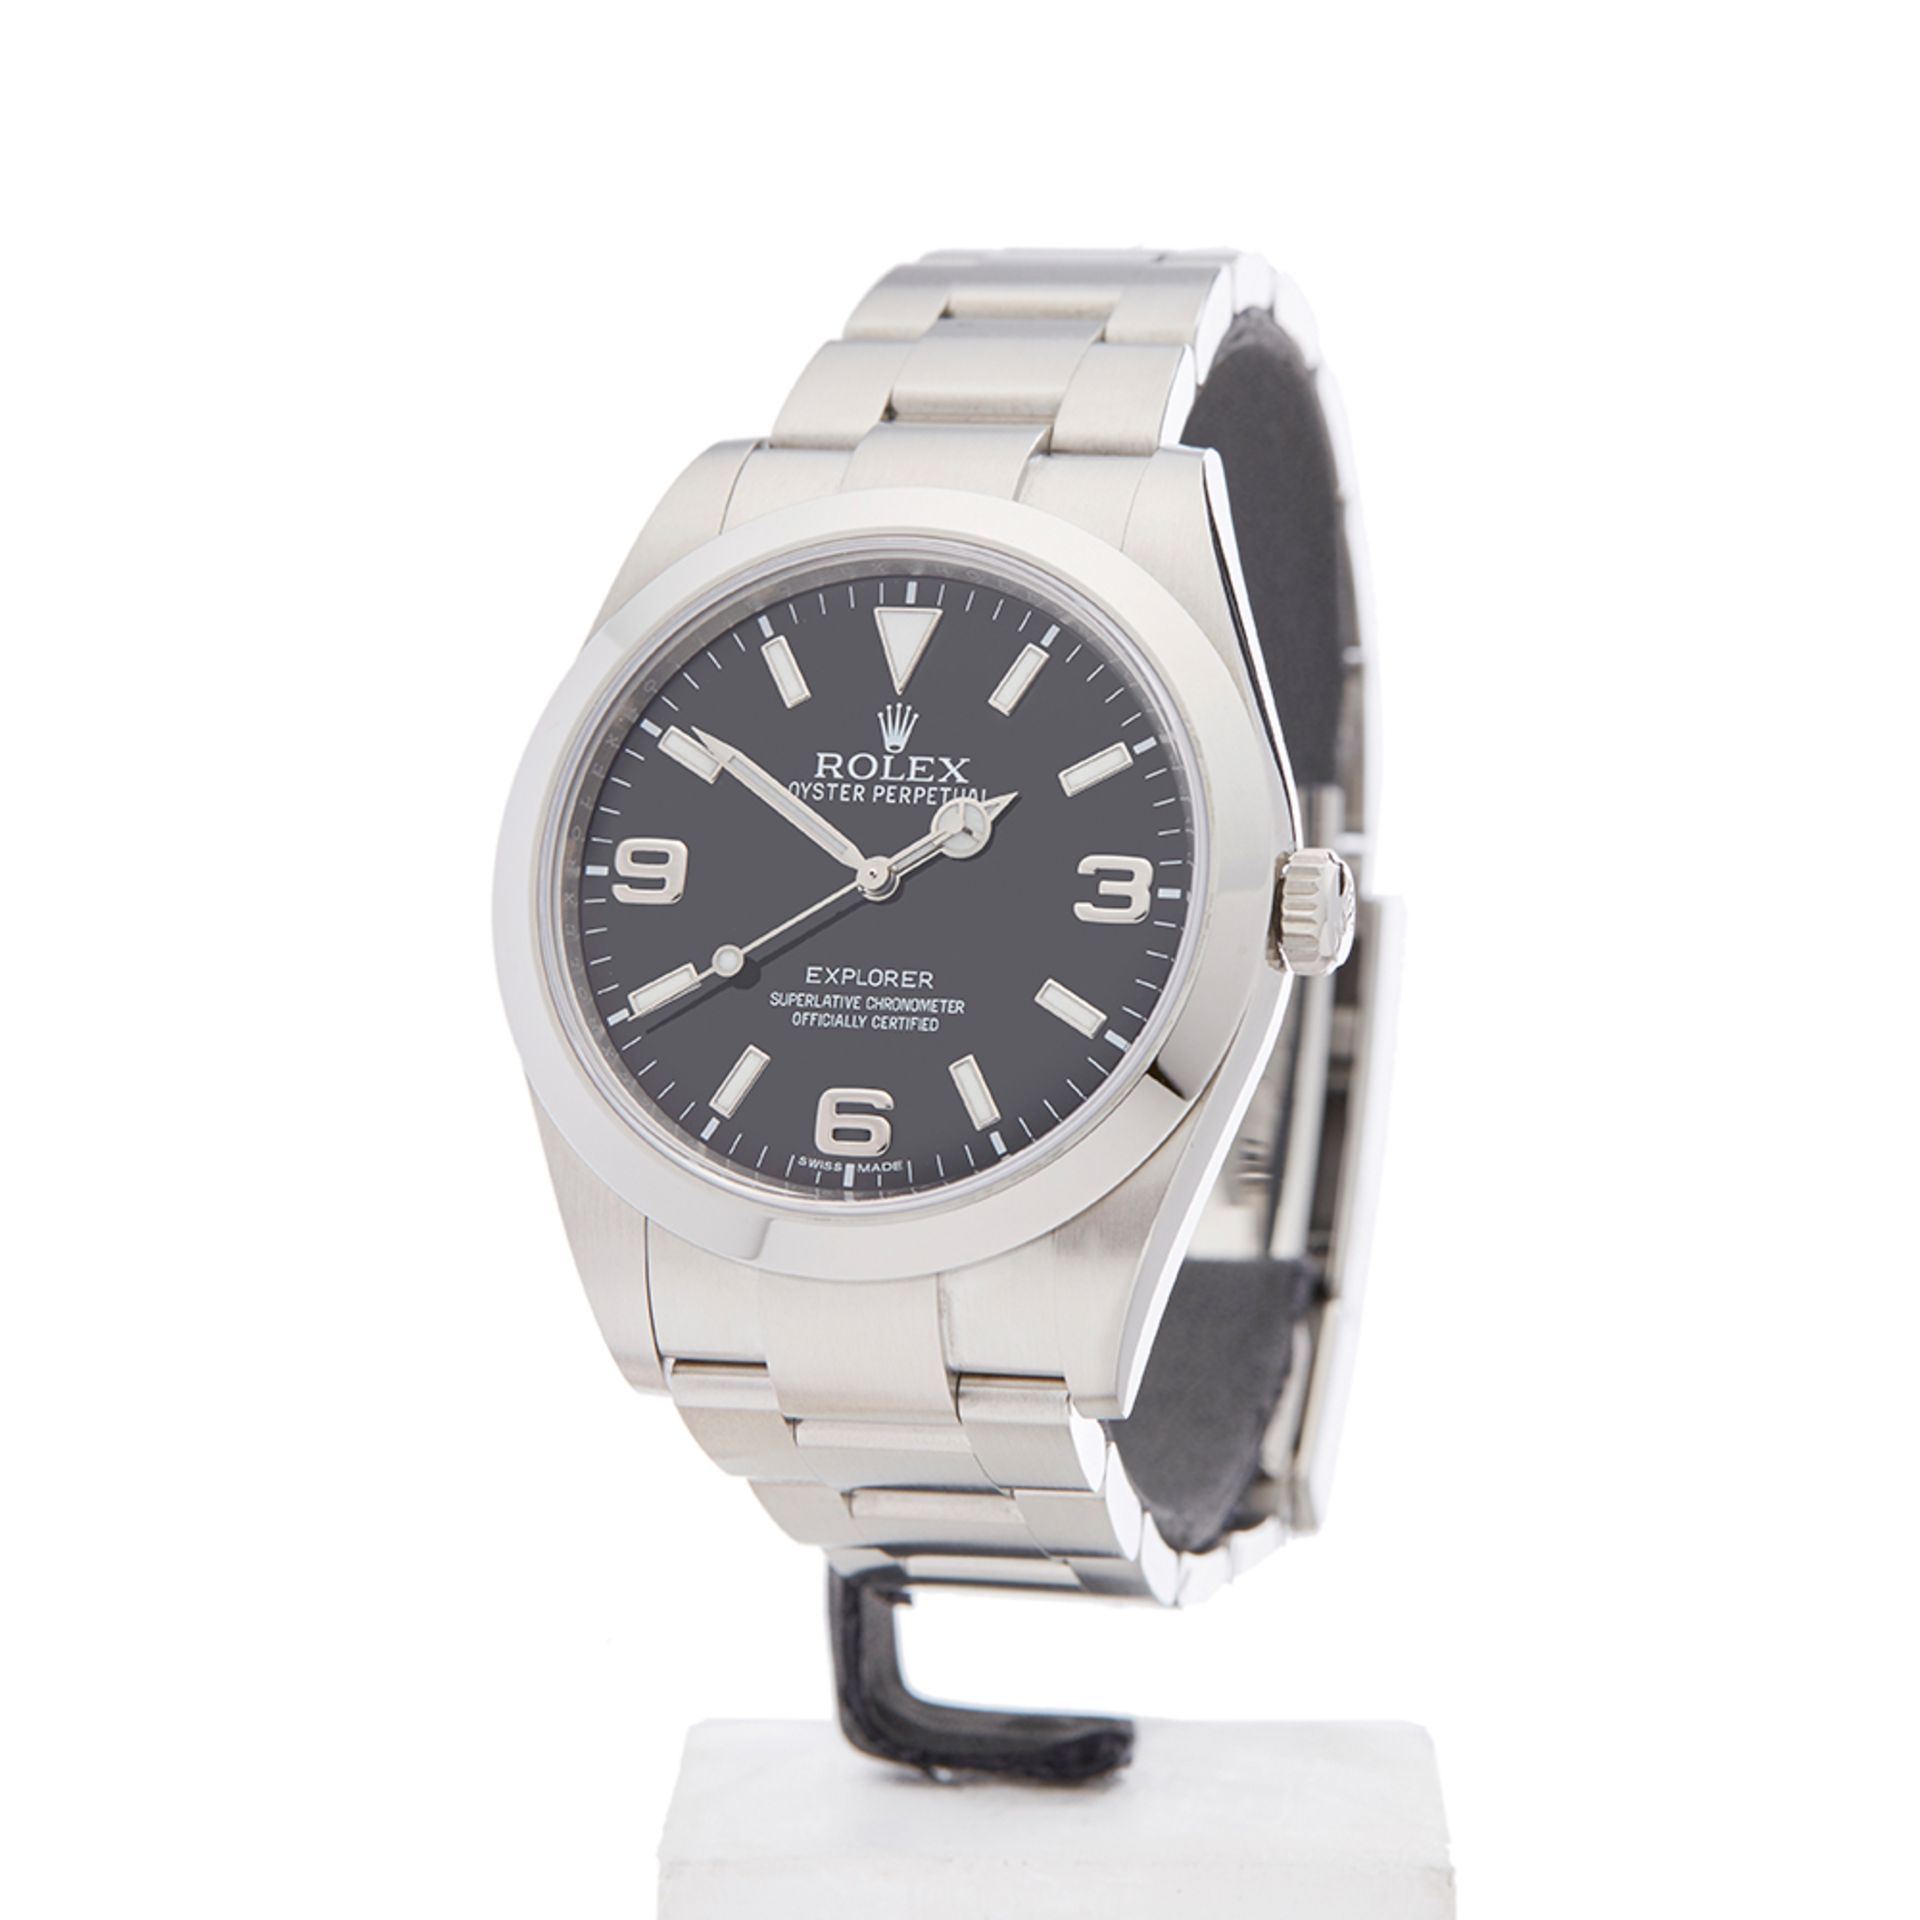 Rolex Explorer I 39mm Stainless Steel - 214270 - Image 3 of 9